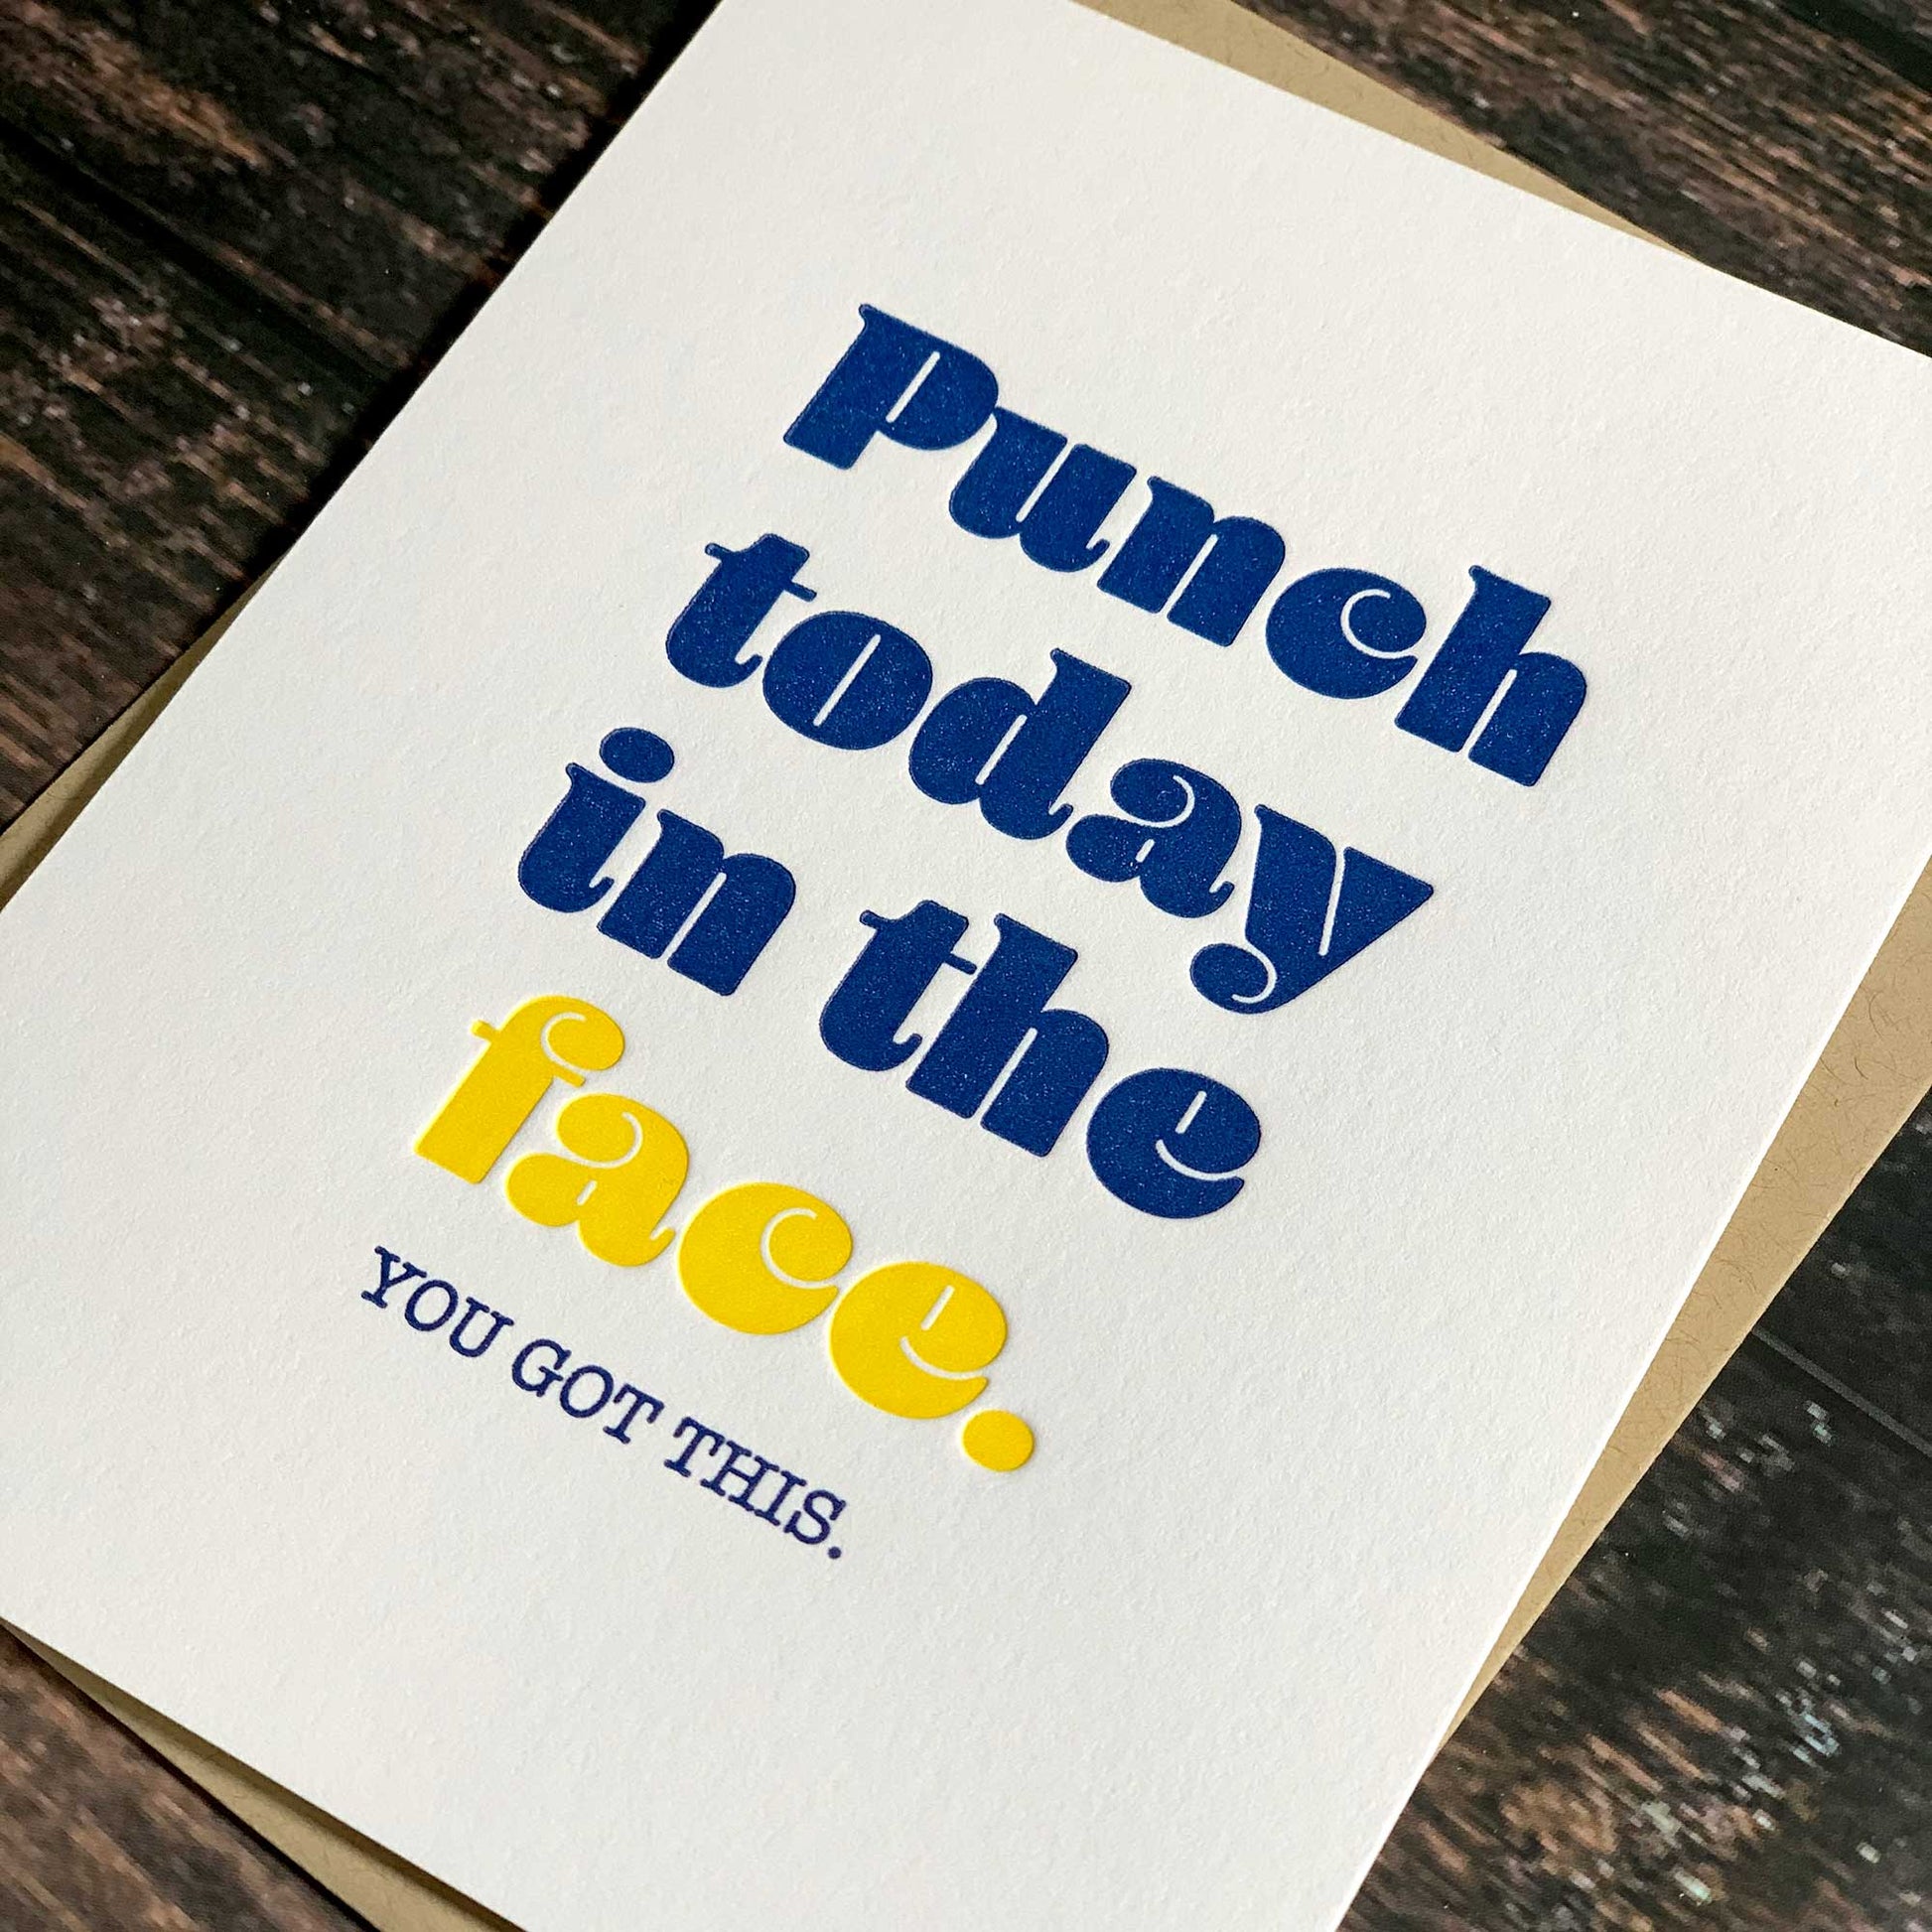 Punch today in the face. You got this. Encouragement Card, Letterpress printed, view shows letterpress impression, includes envelope